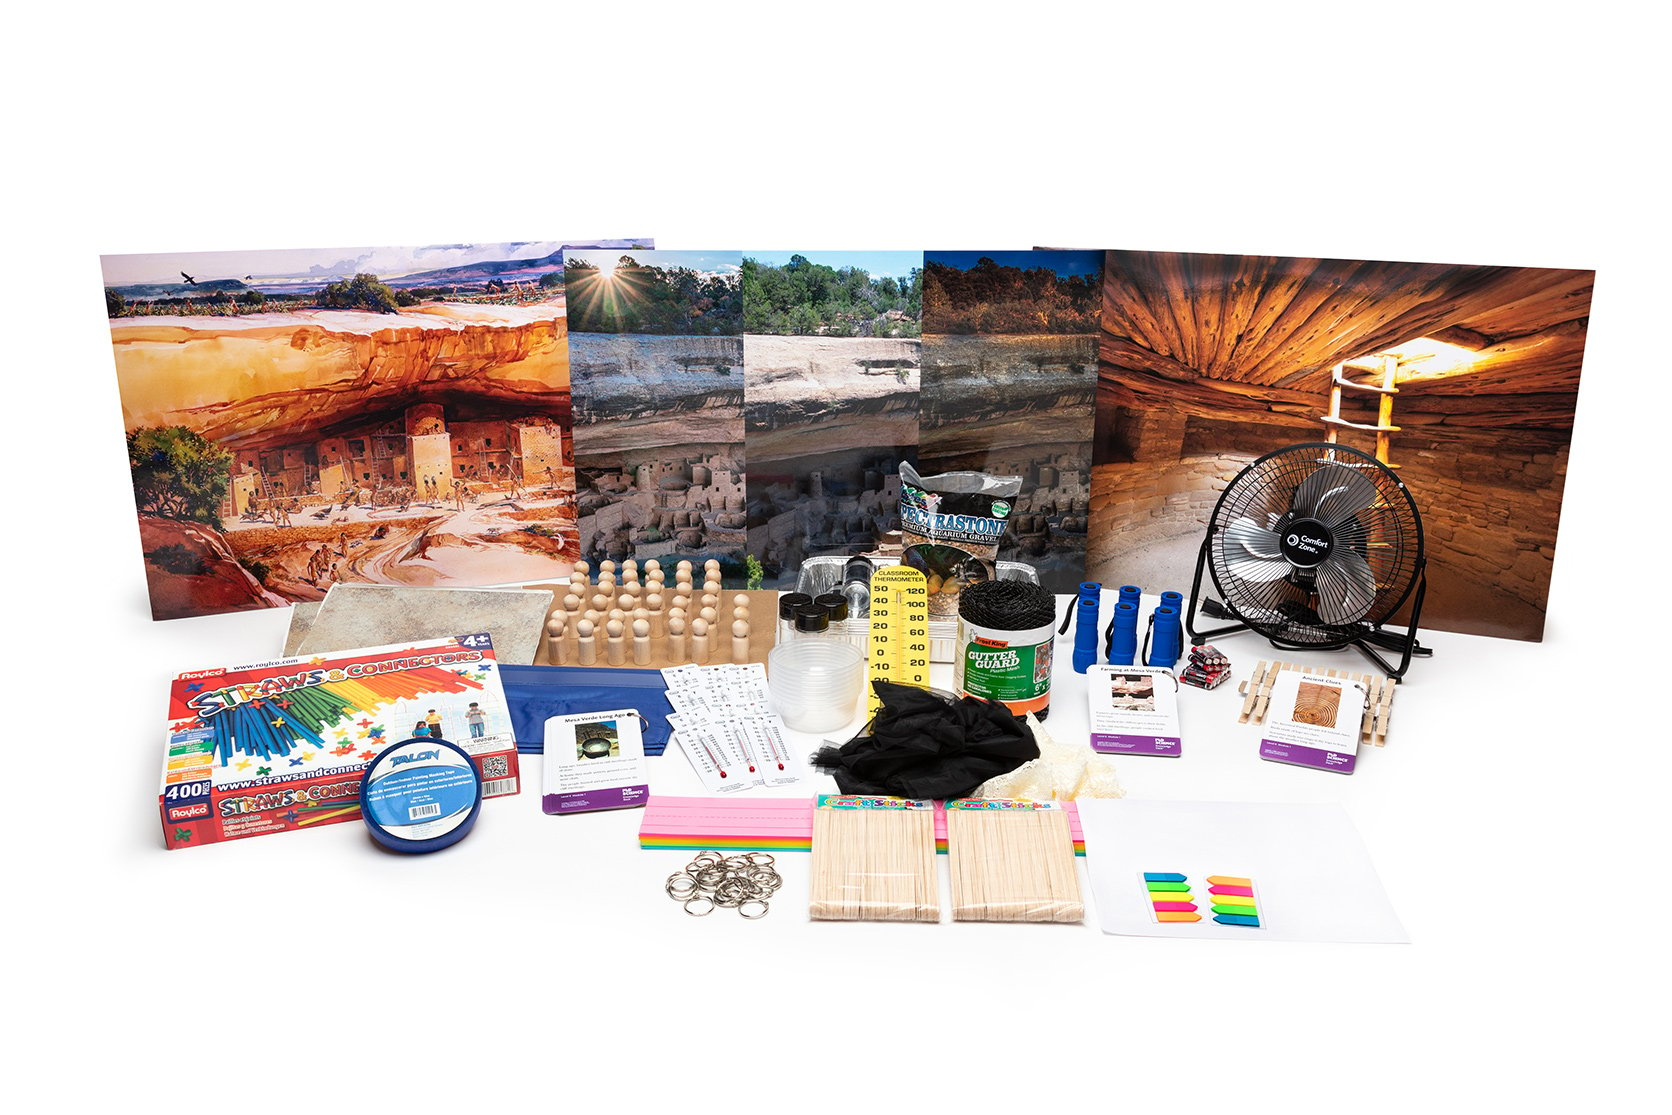 PhD Science hands-on materials kit from Level K Module 1 that includes a fan, wooden dolls, Knowledge Deck cards and posters, and safety goggles